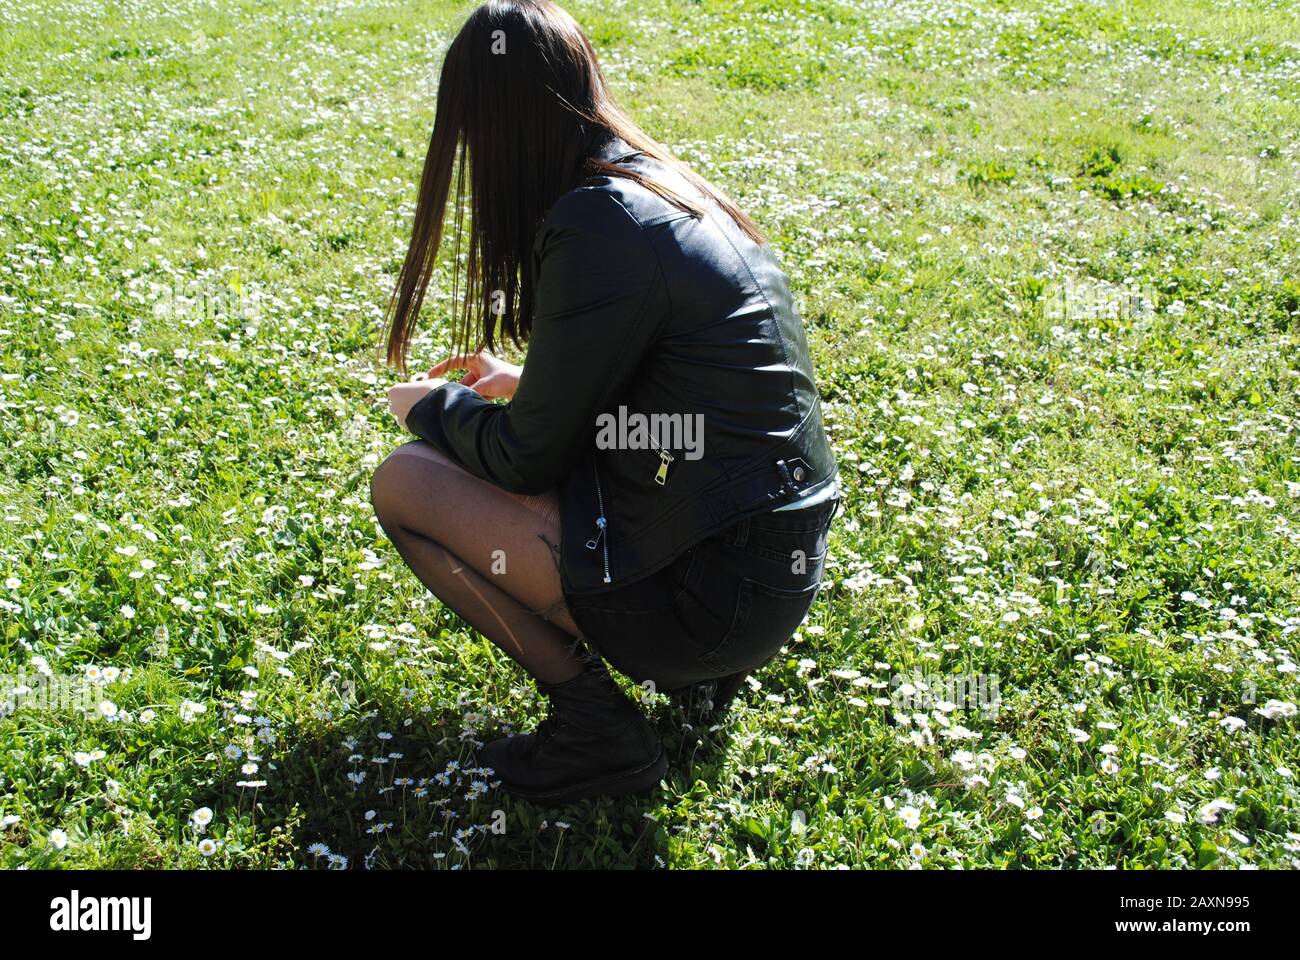 A girl dressed in black picking up flowers Stock Photo